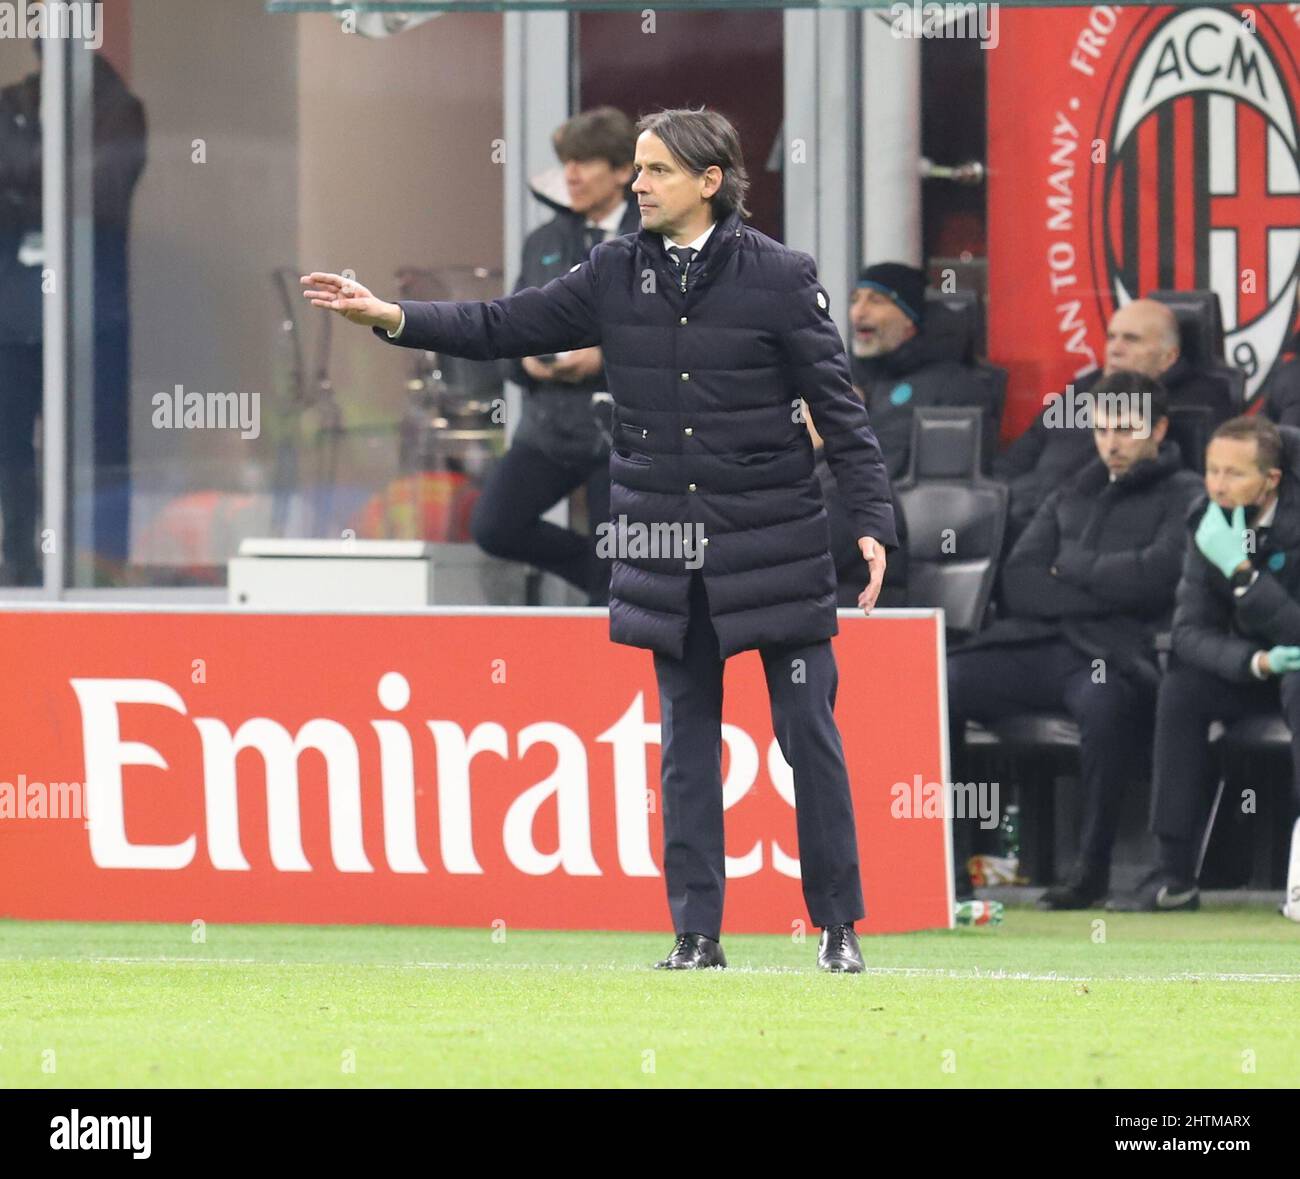 MILAN ITALY- March 1 Stadio G Meazza  Inzaghi Simone during the Italy Cup match between Ac Milan and Fc Inter  at Stadio G. Meazza on March 1  2022 in Milan, Italy. Credit: Christian Santi/Alamy Live News Stock Photo